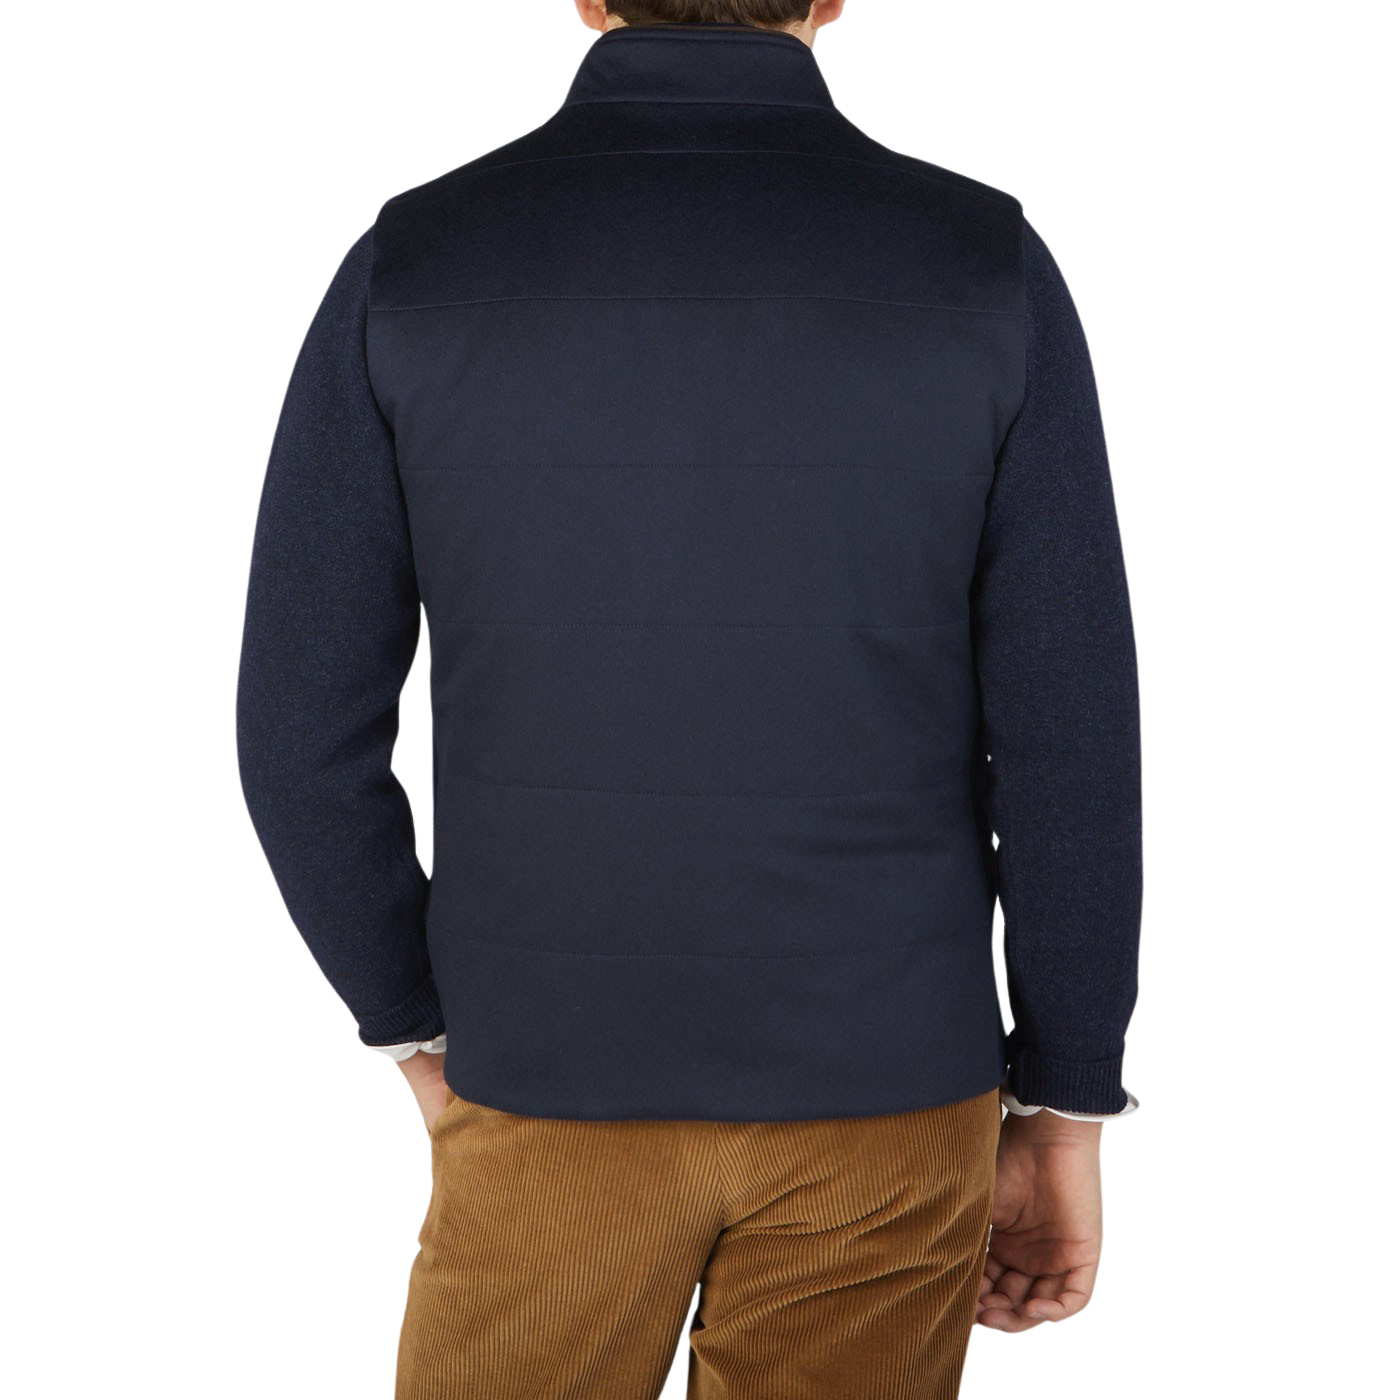 The Maurizio Baldassari Navy Water Repellent Pure Cashmere Gilet on a man's back.